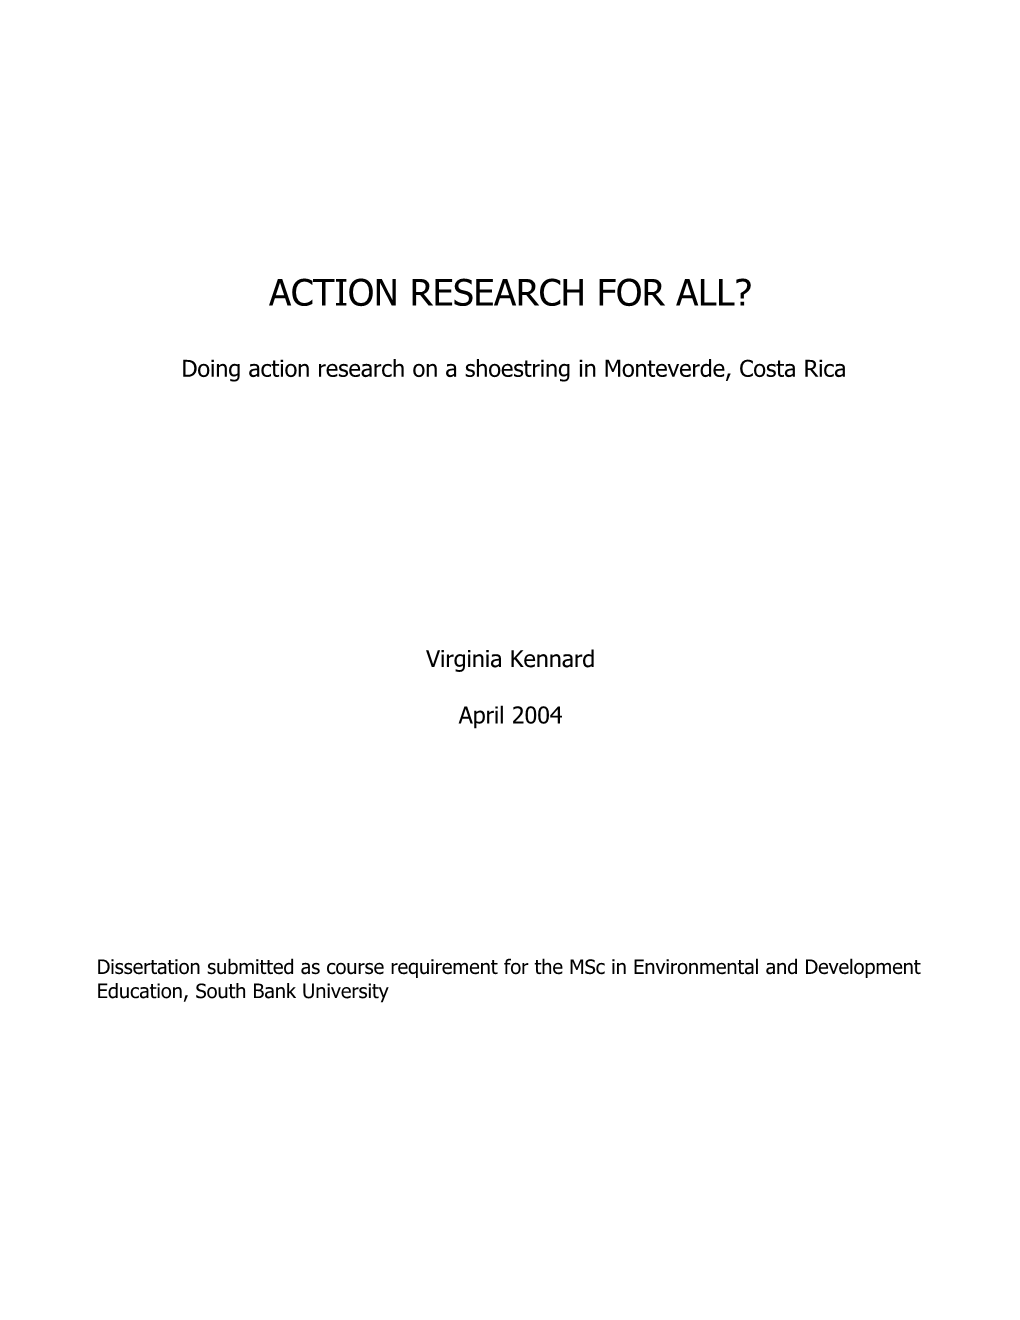 Action Research for All